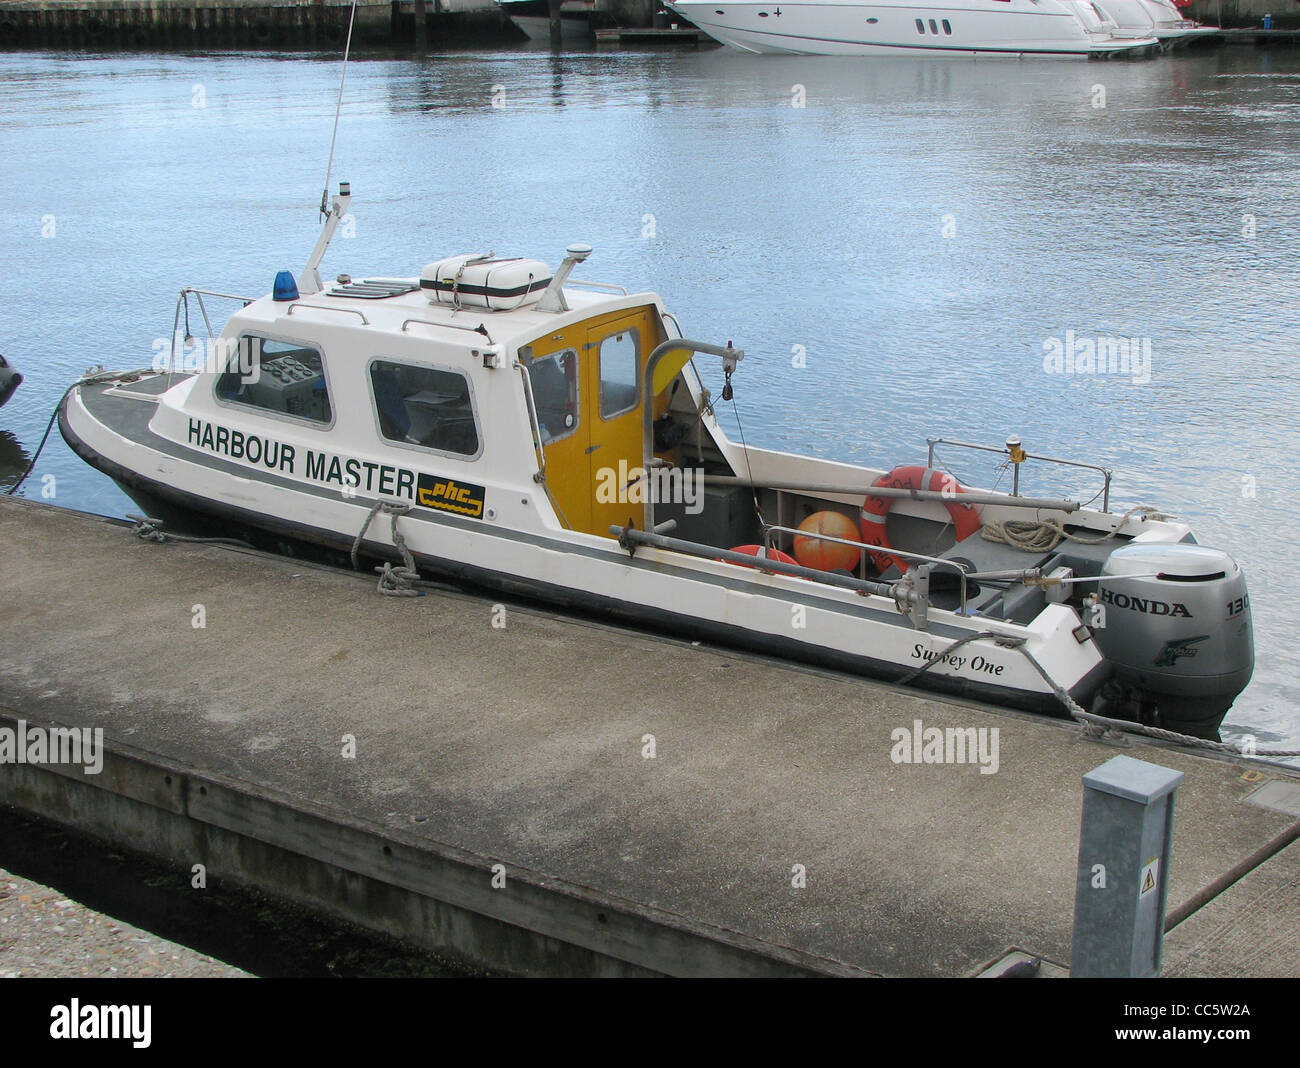 The Harbour Master’s transport at Poole, Dorset, England. Stock Photo